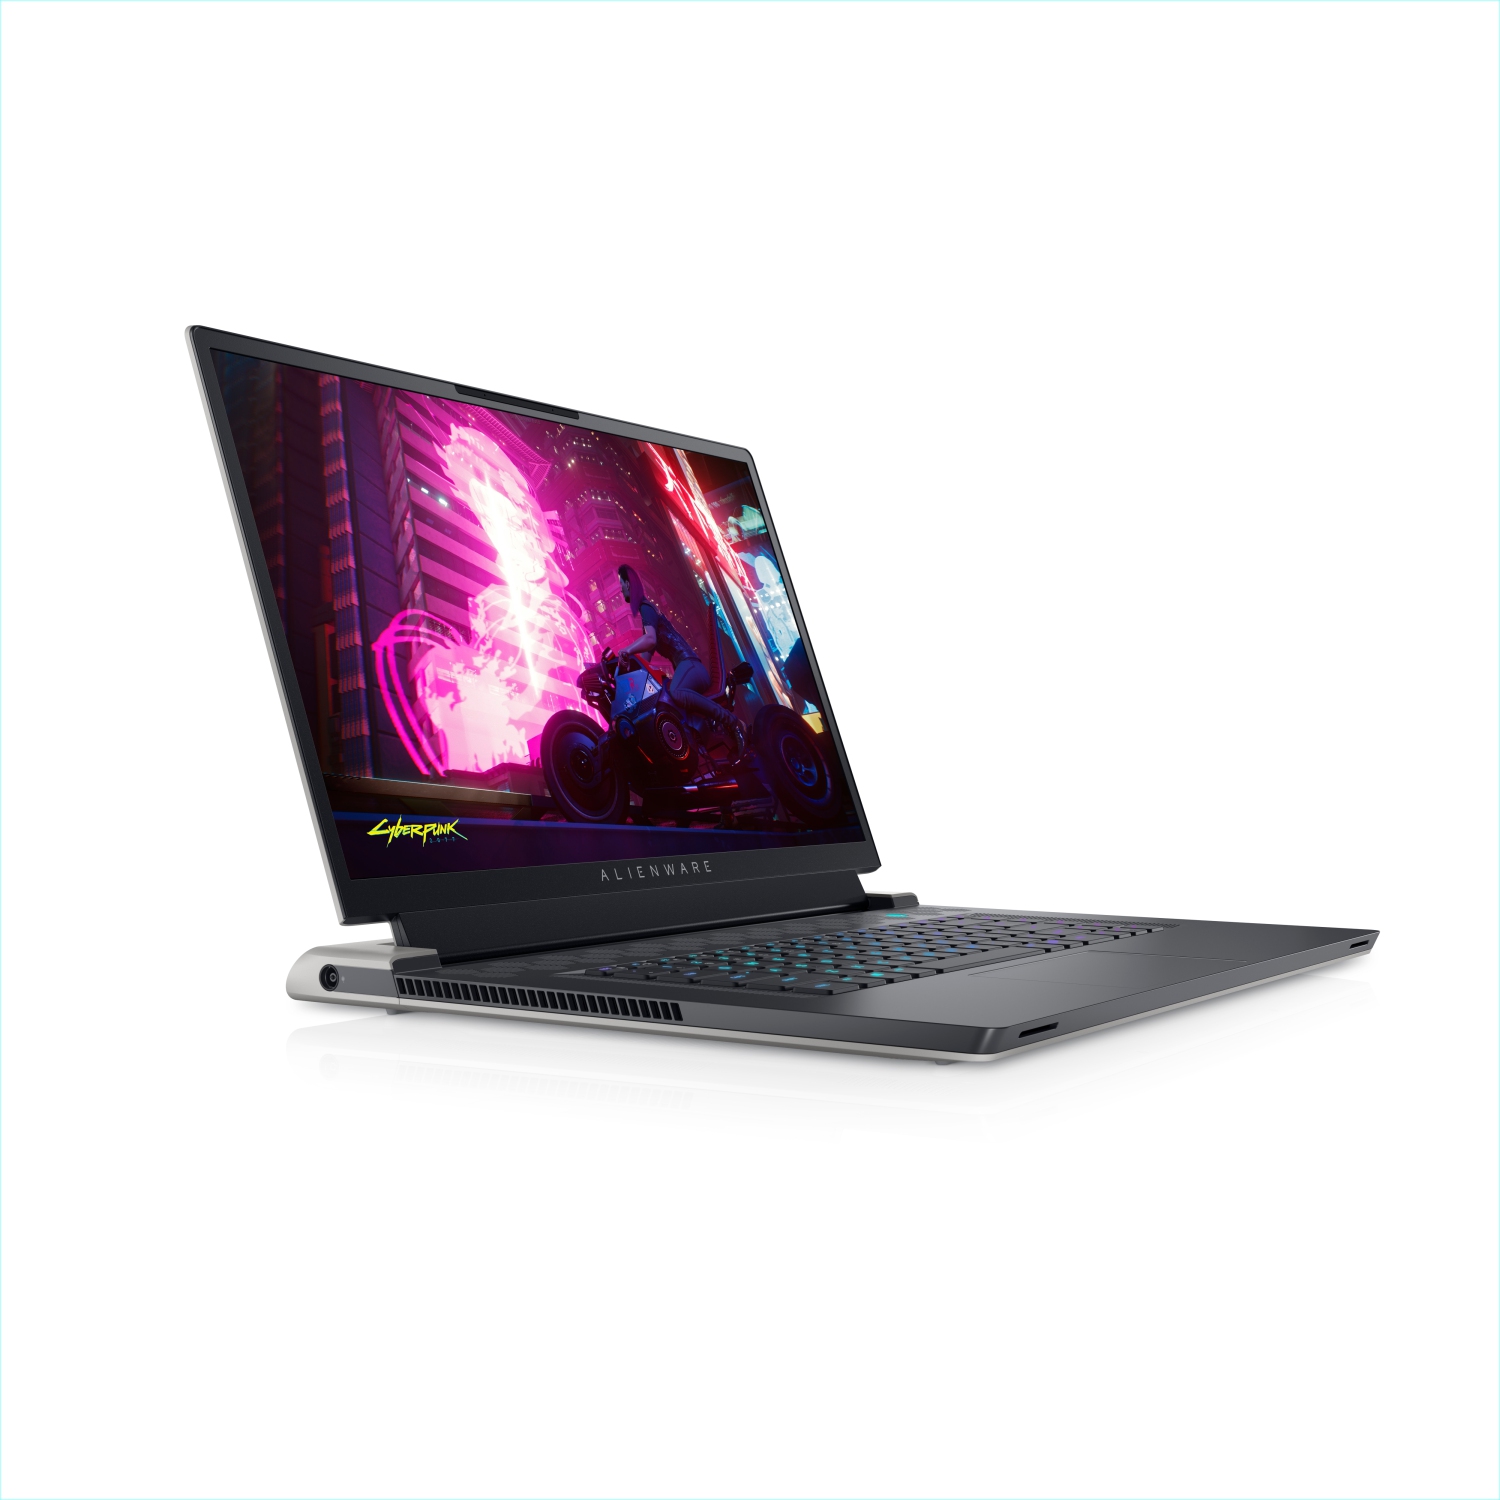 Refurbished (Excellent) – Dell Alienware X17 R1 Gaming Laptop (2021) | 17.3" FHD | Core i7 - 1TB SSD - 16GB RAM - RTX 3070 | 8 Cores @ 4.6 GHz - 11th Gen CPU - 8GB GDDR6